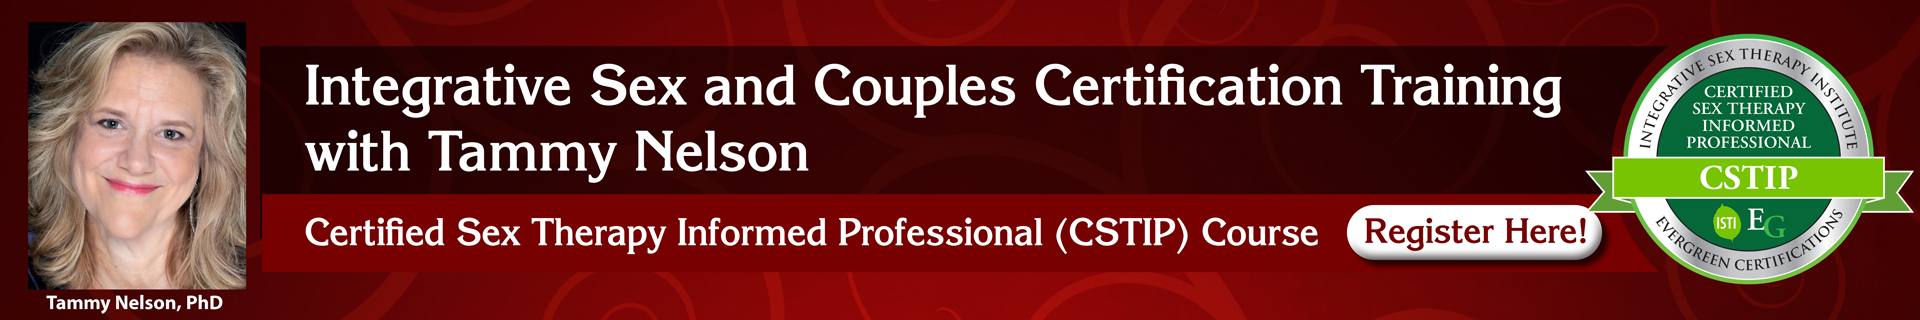 Integrative Sex and Couples Certification Training with Tammy Nelson: Certified Sex Therapy Informed Professional (CSTIP) Course